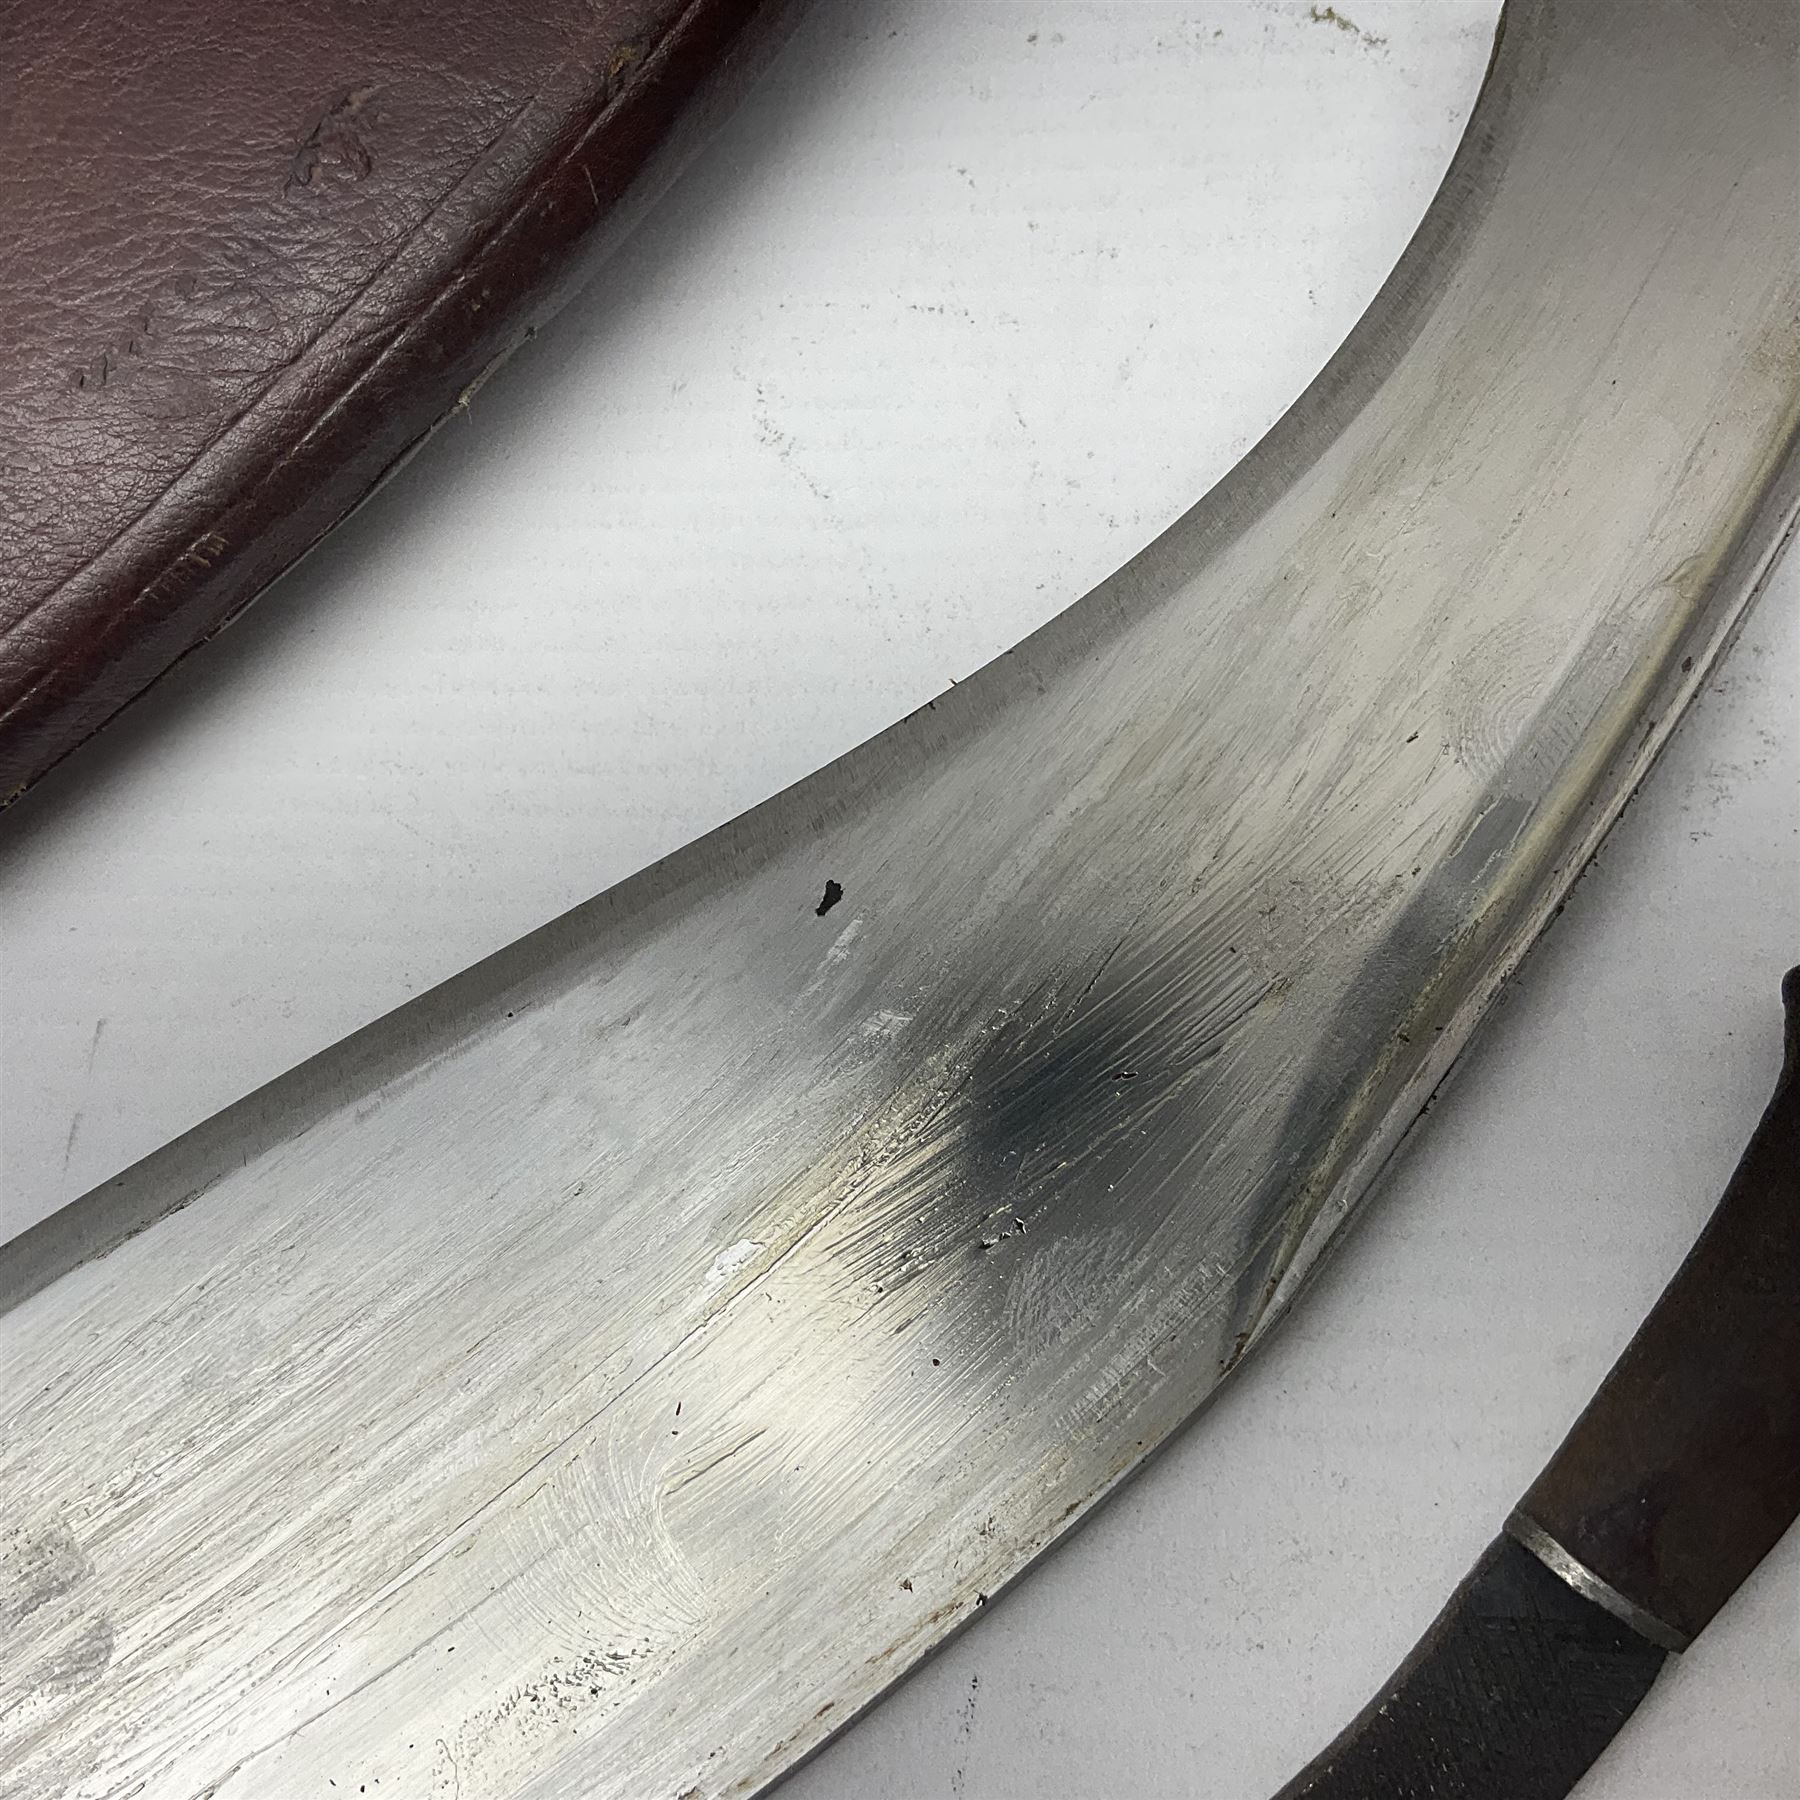 Kukri with curving blade - Image 4 of 19